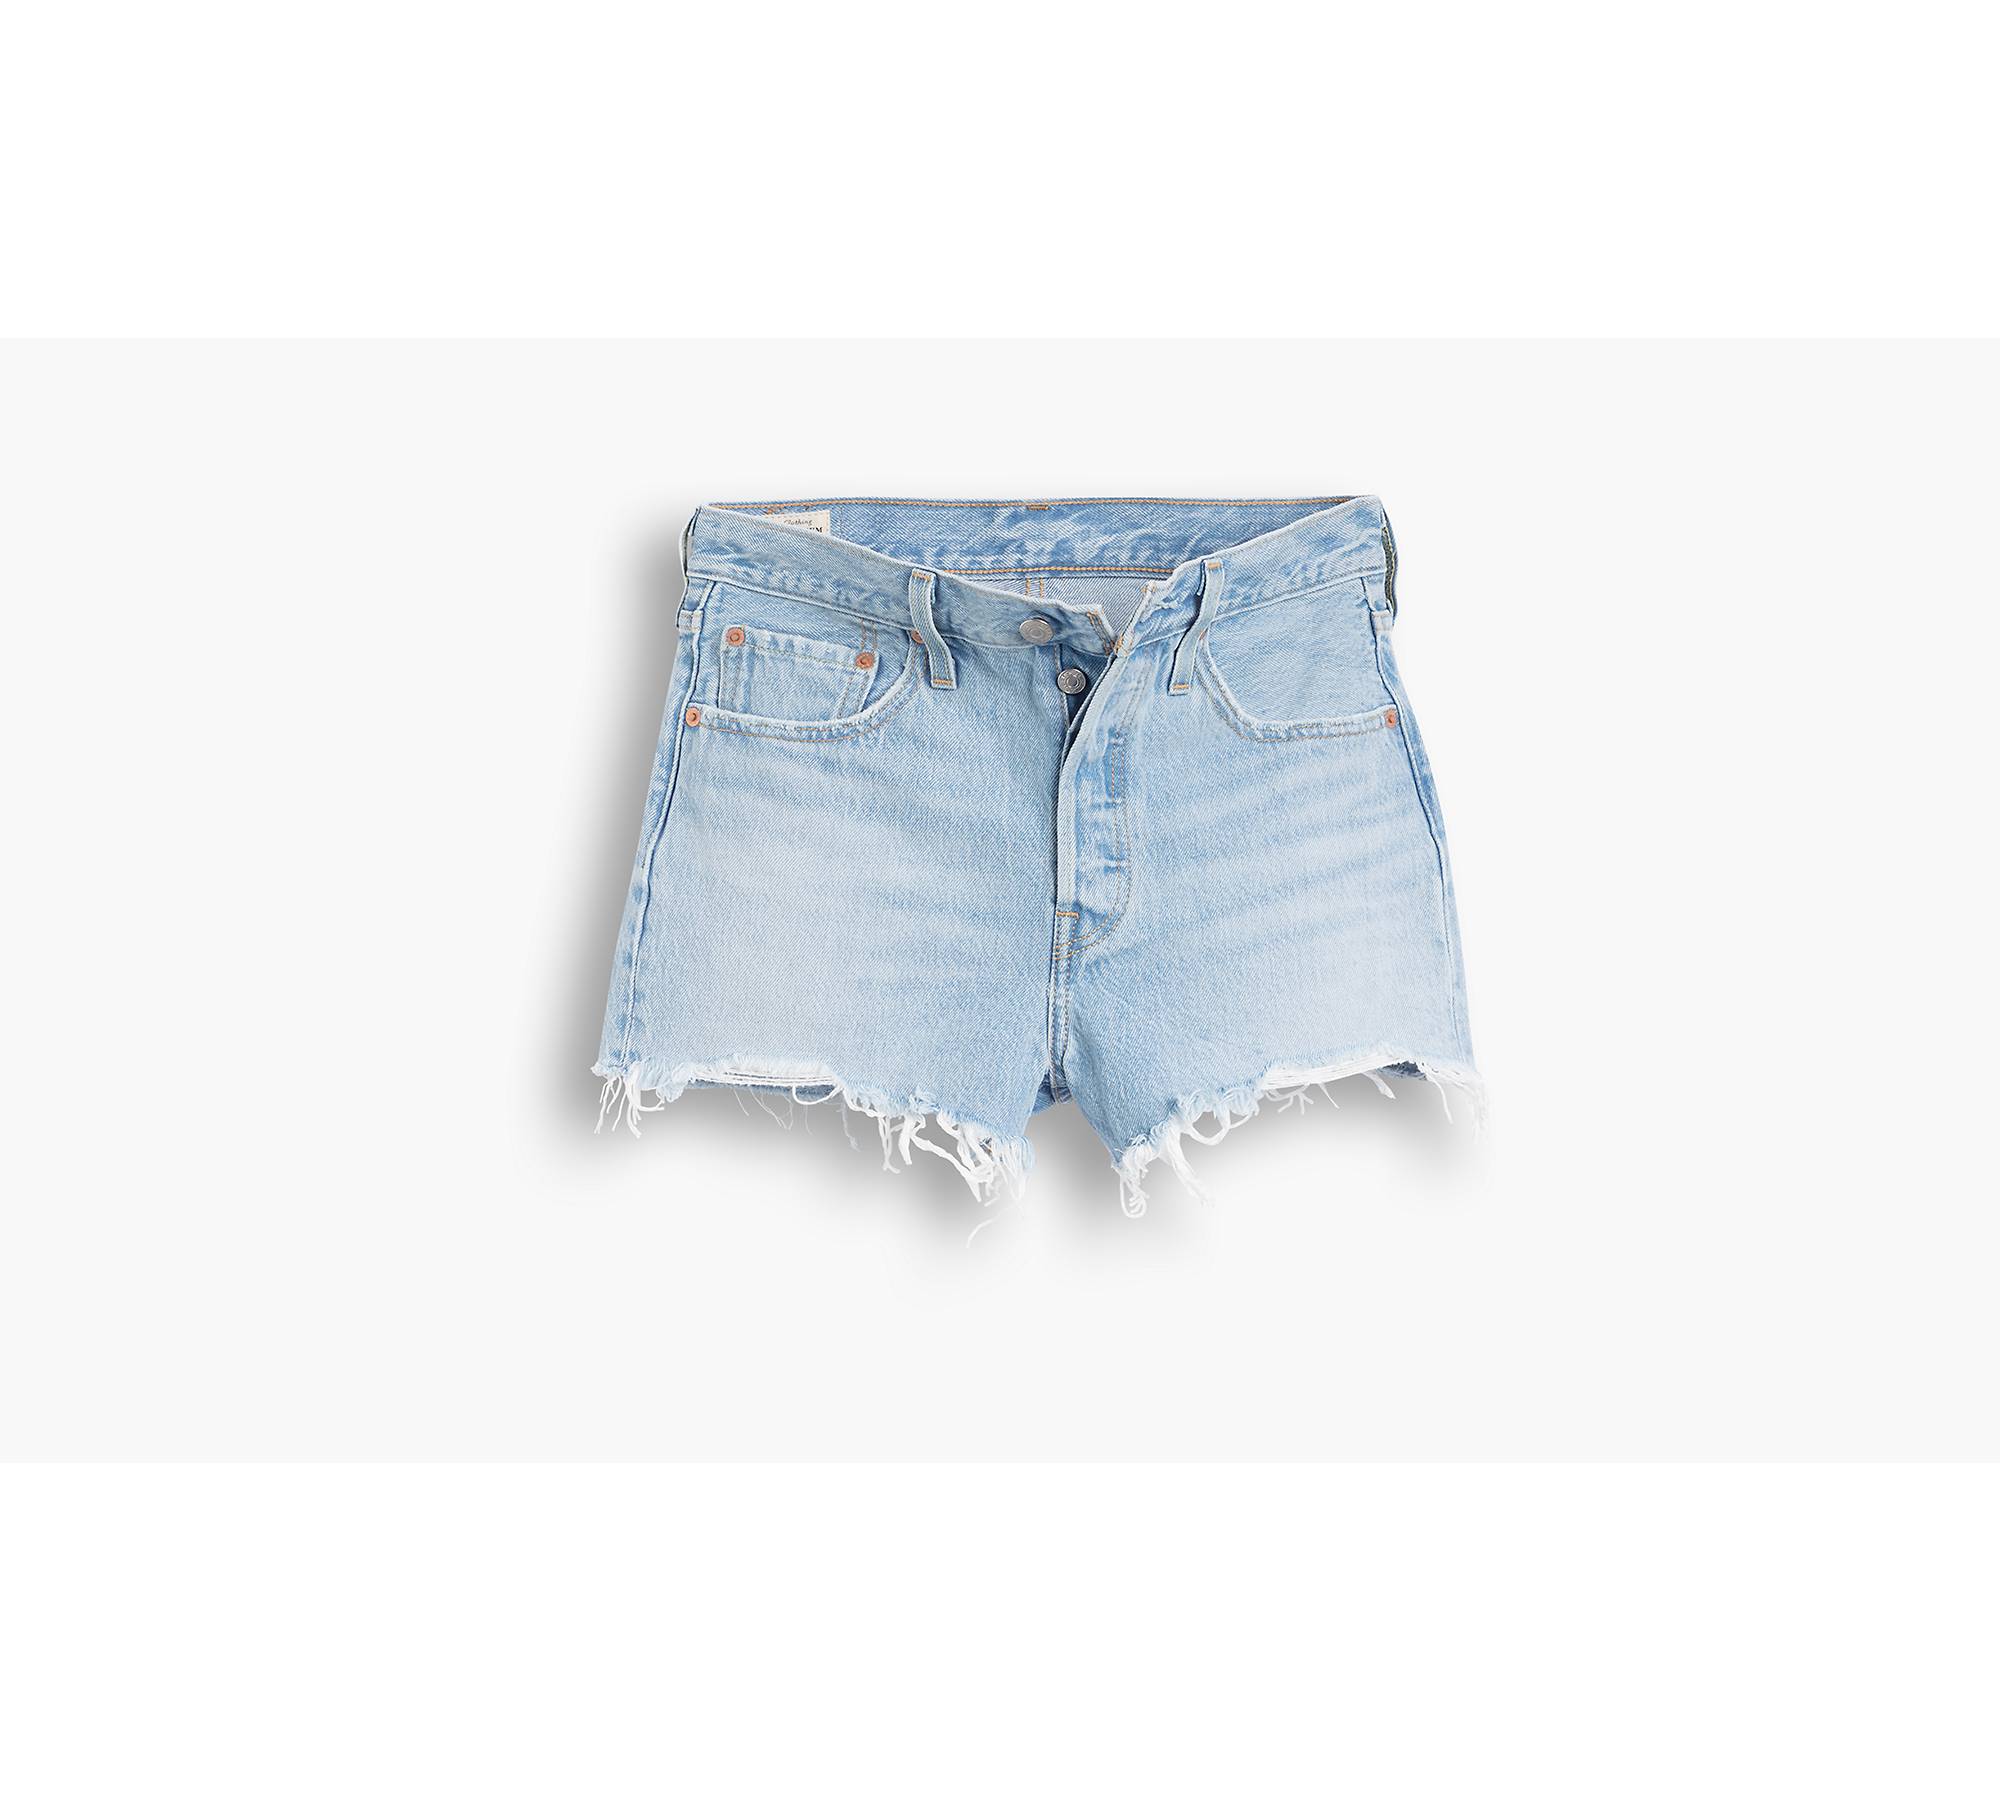 Y2k Here & There Denim Culottes Vintage Blue Denim Shorts With